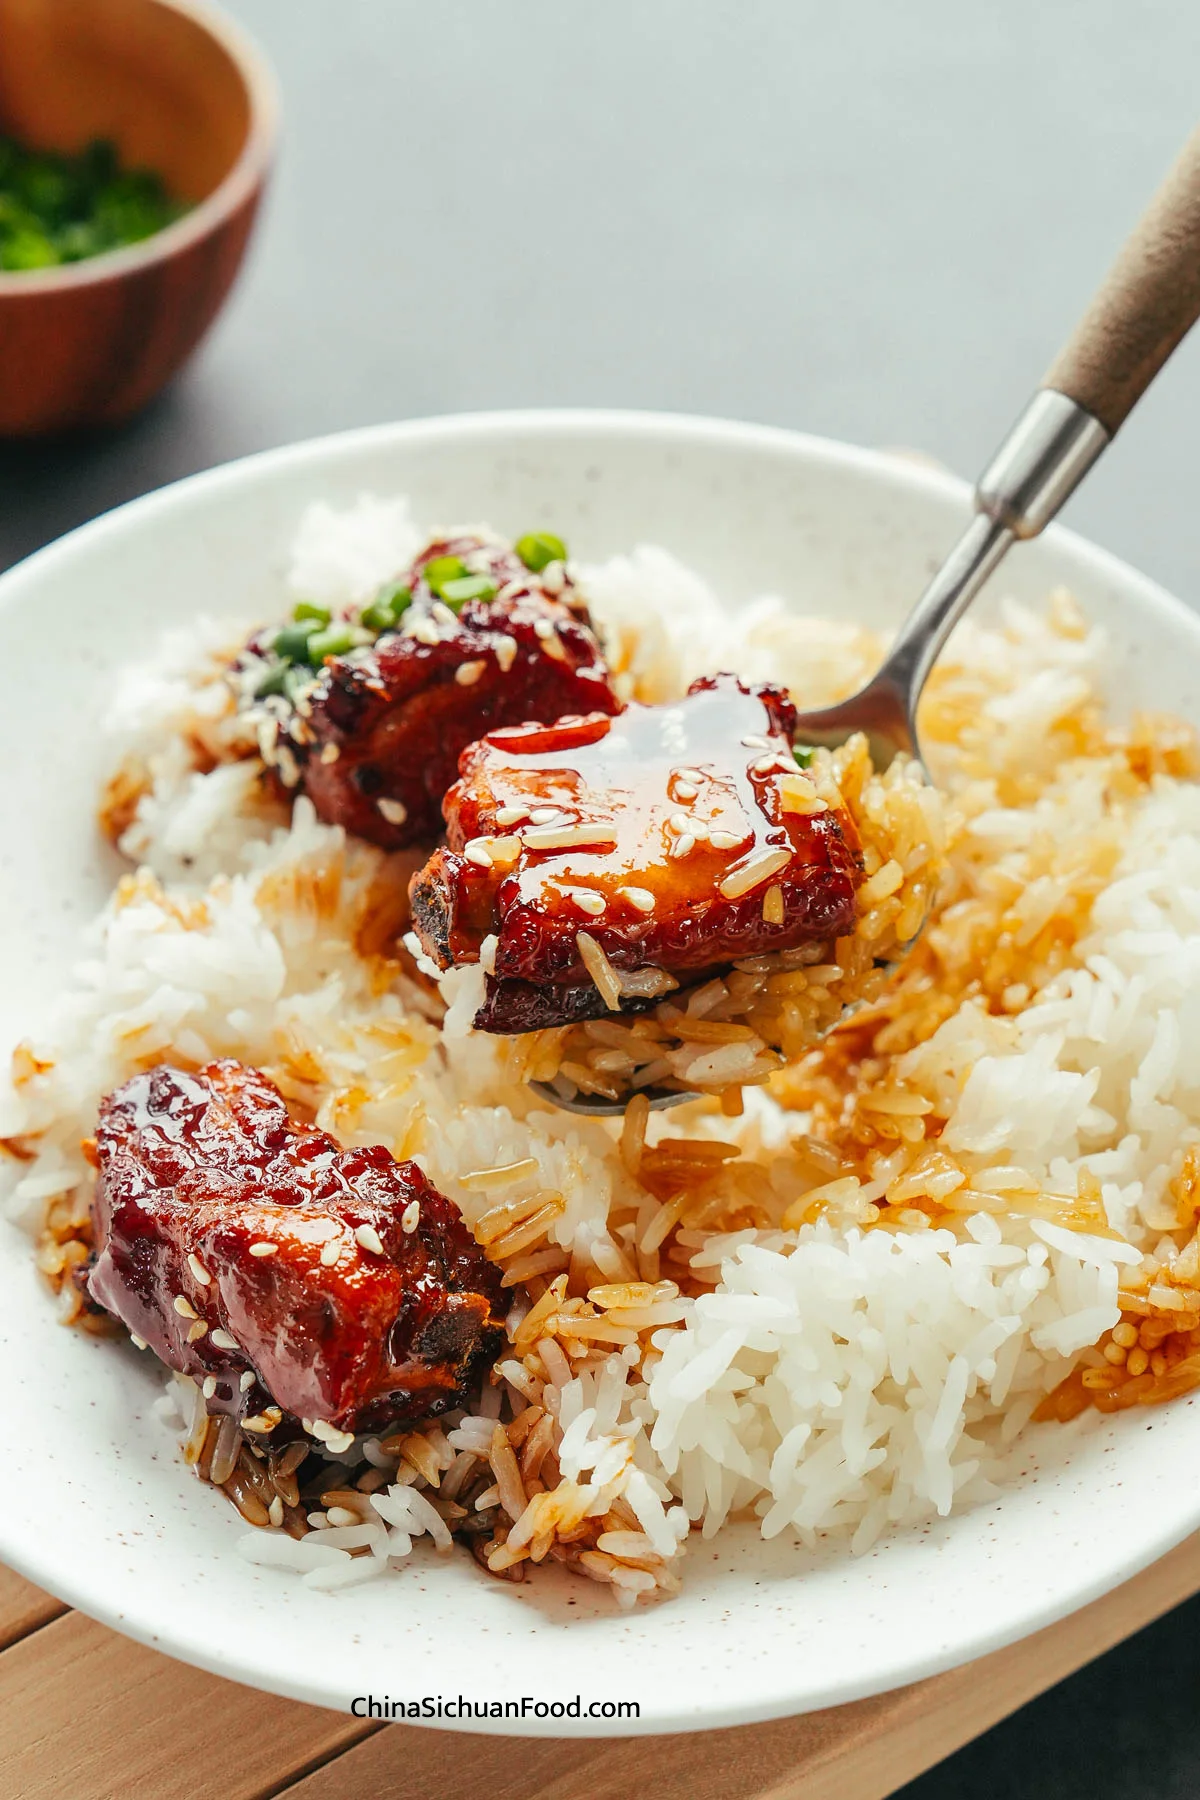 sweet and sour ribs with steamed rice| ChinaSichuanFood.com